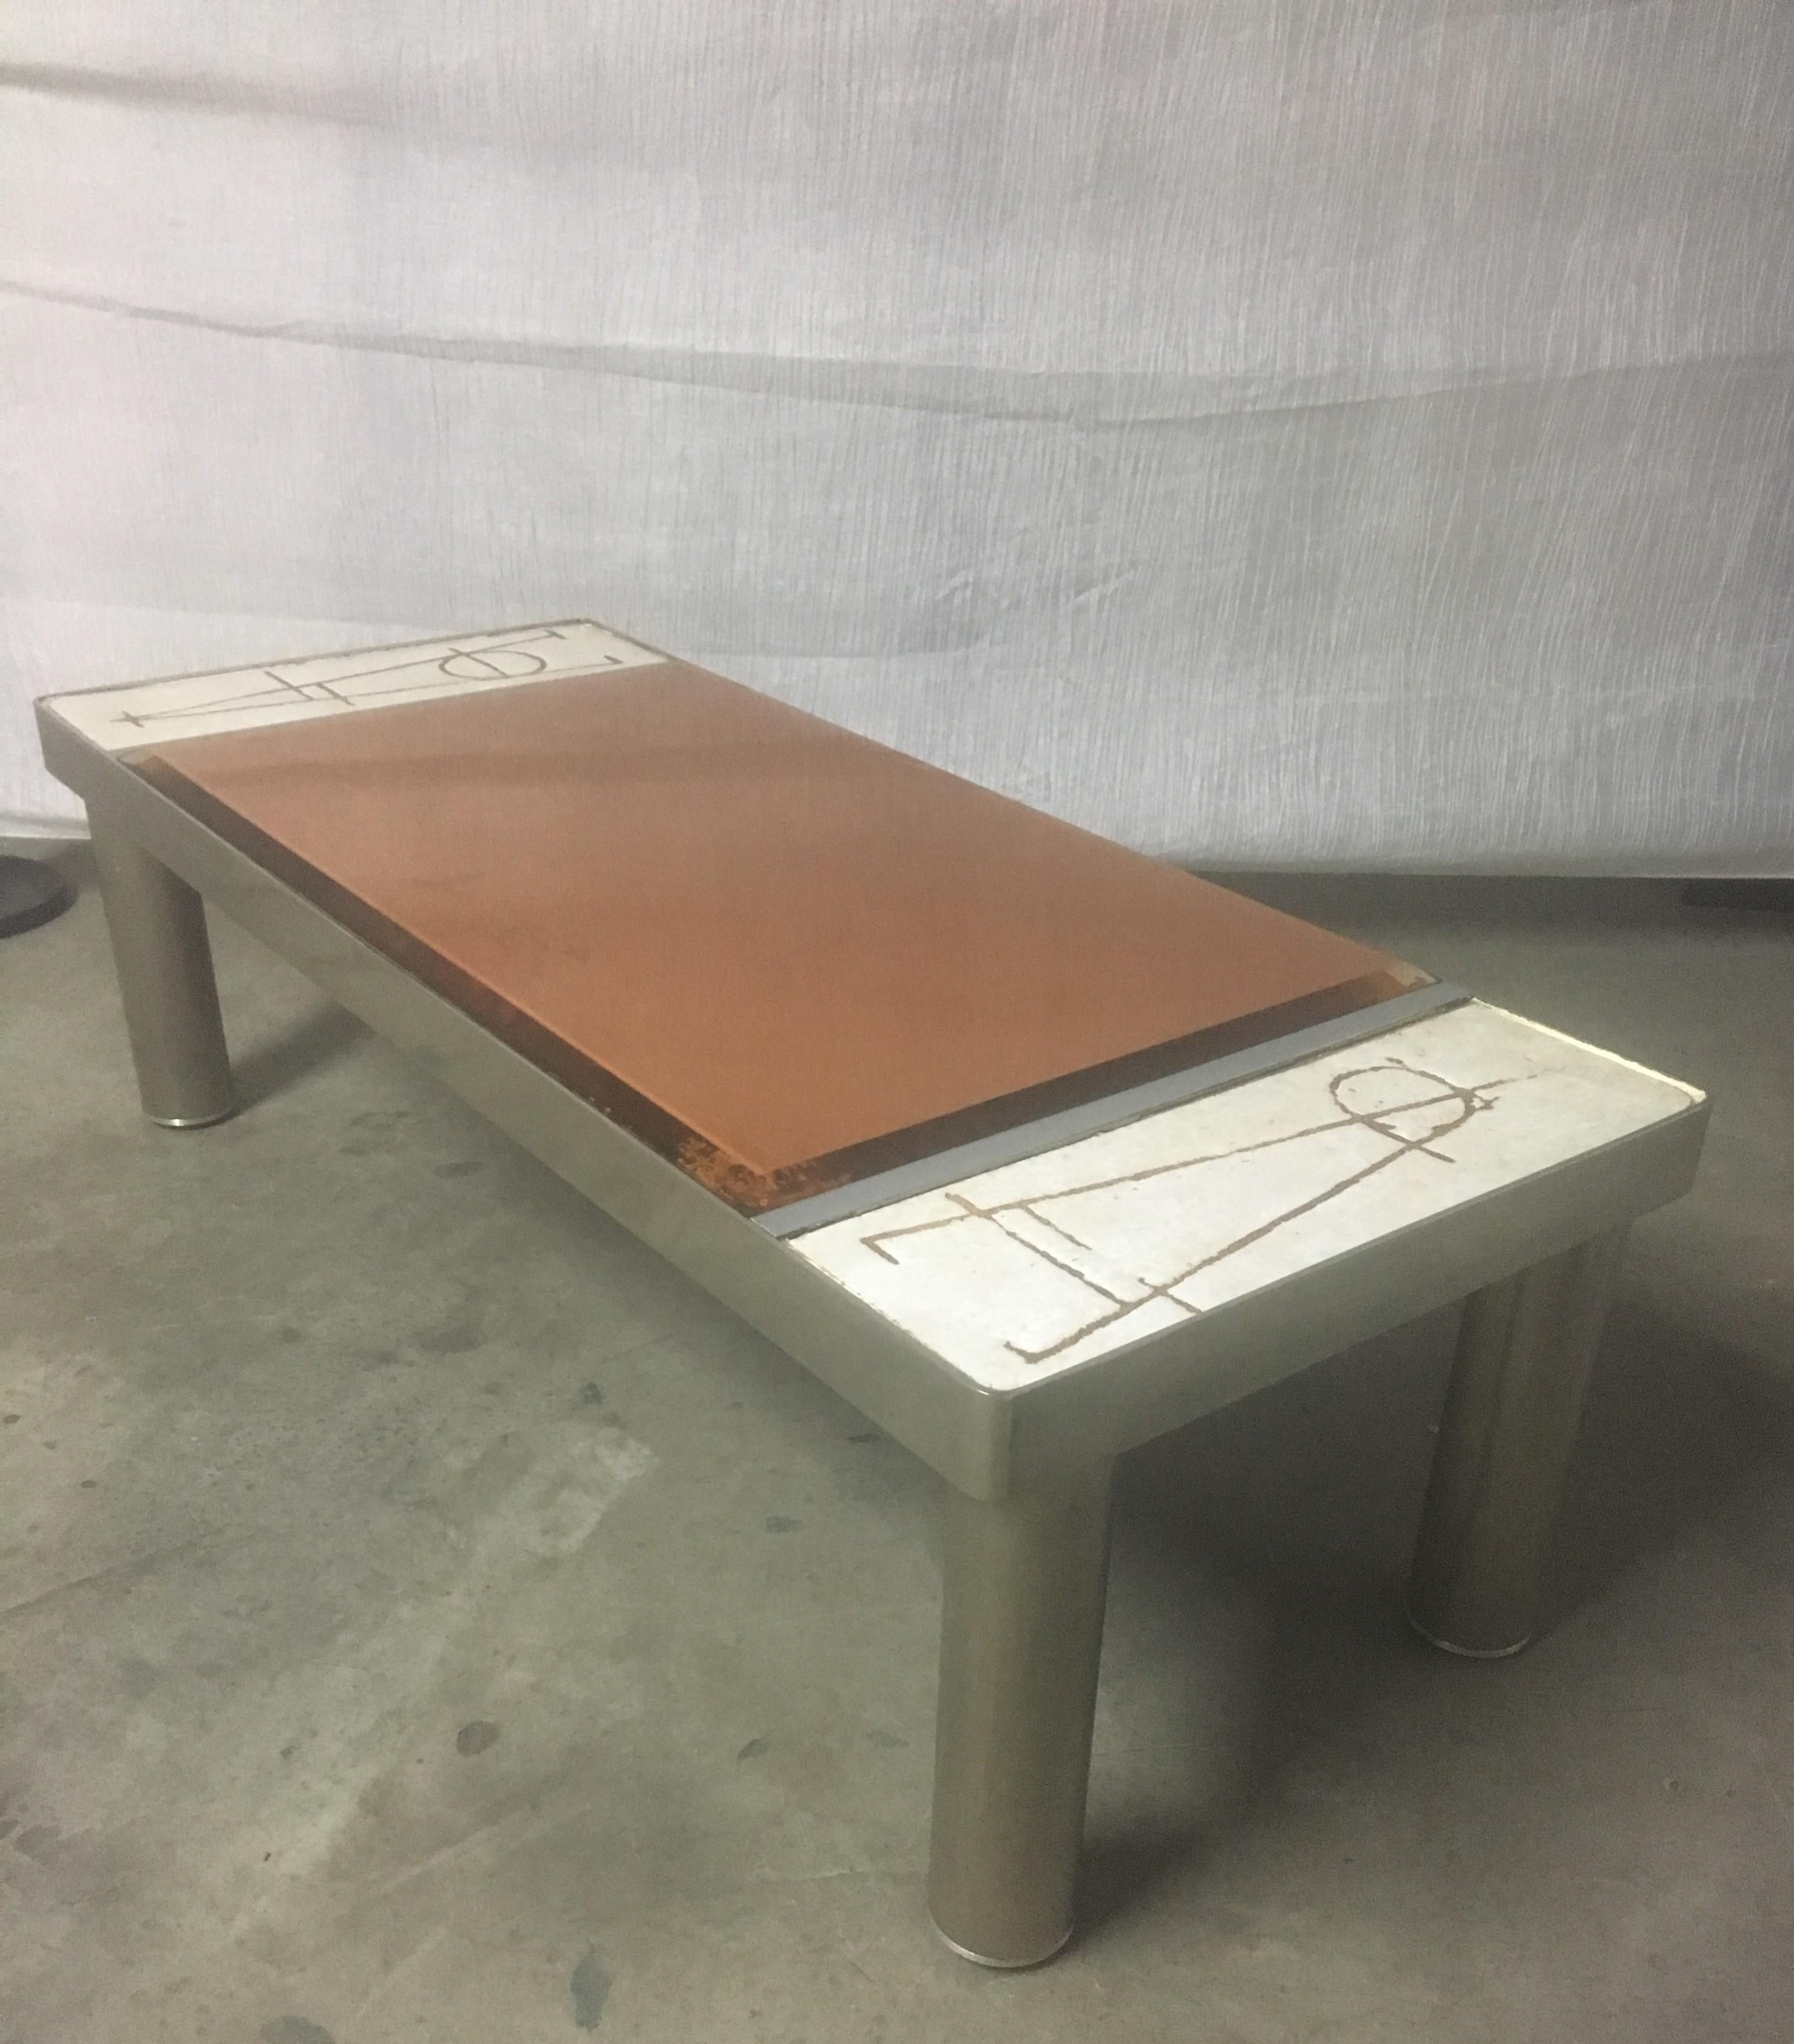 Futurist Ceramic and Chromed Metal Rectangular Coffee Table, Brown Glass Slab Top, 1970s For Sale